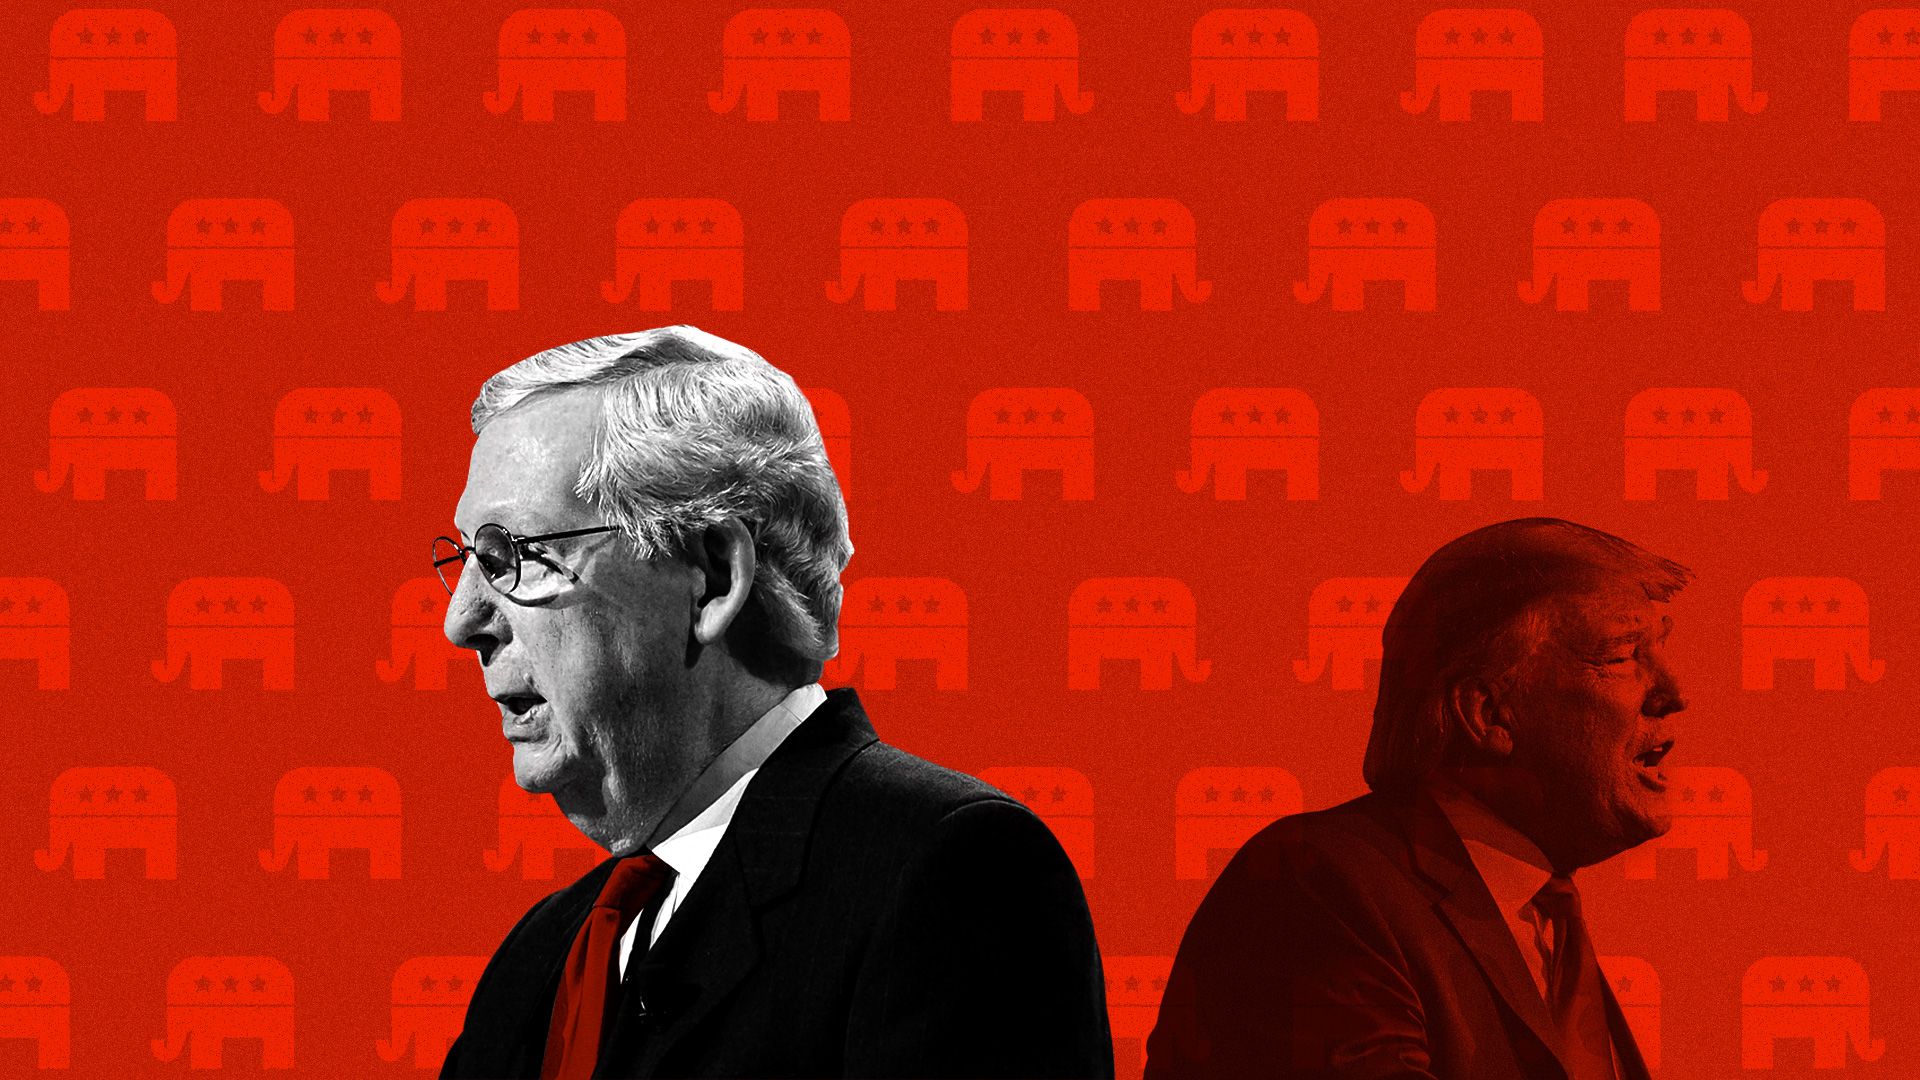 Mitch McConnell standing with Donald Trump on a background of GOP elephant symbols